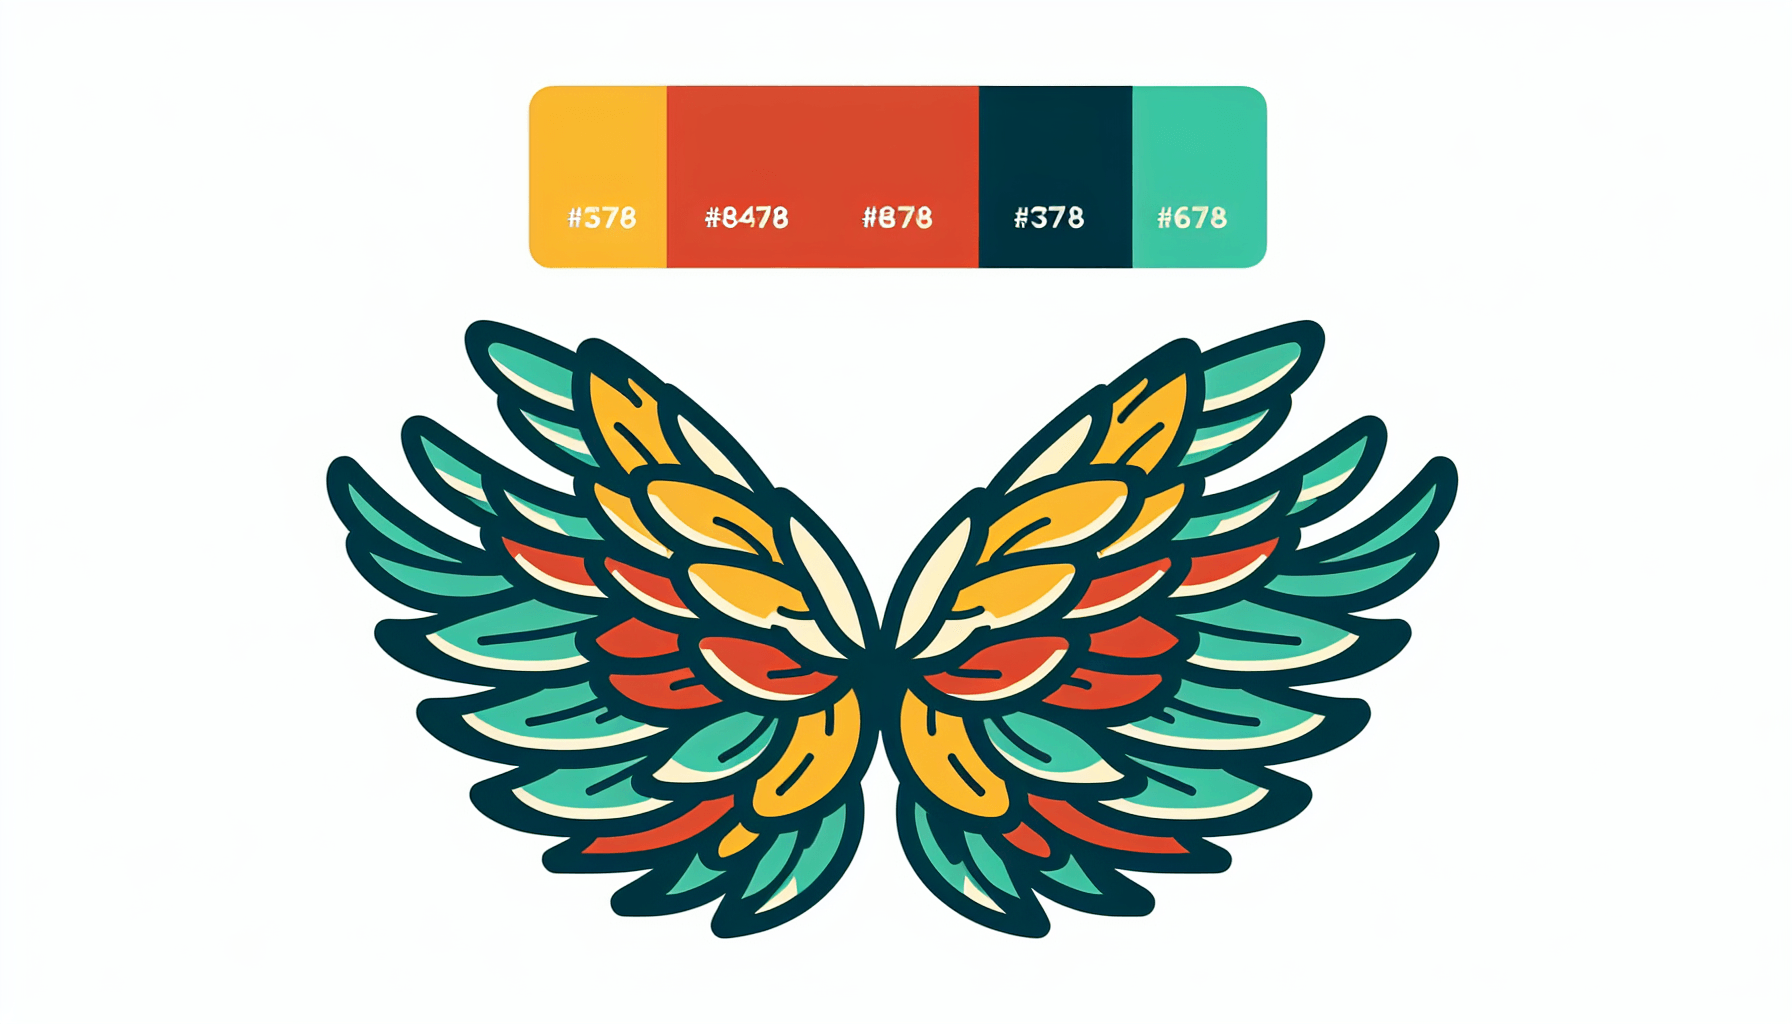 Wing in flat illustration style and white background, red #f47574, green #88c7a8, yellow #fcc44b, and blue #645bc8 colors.